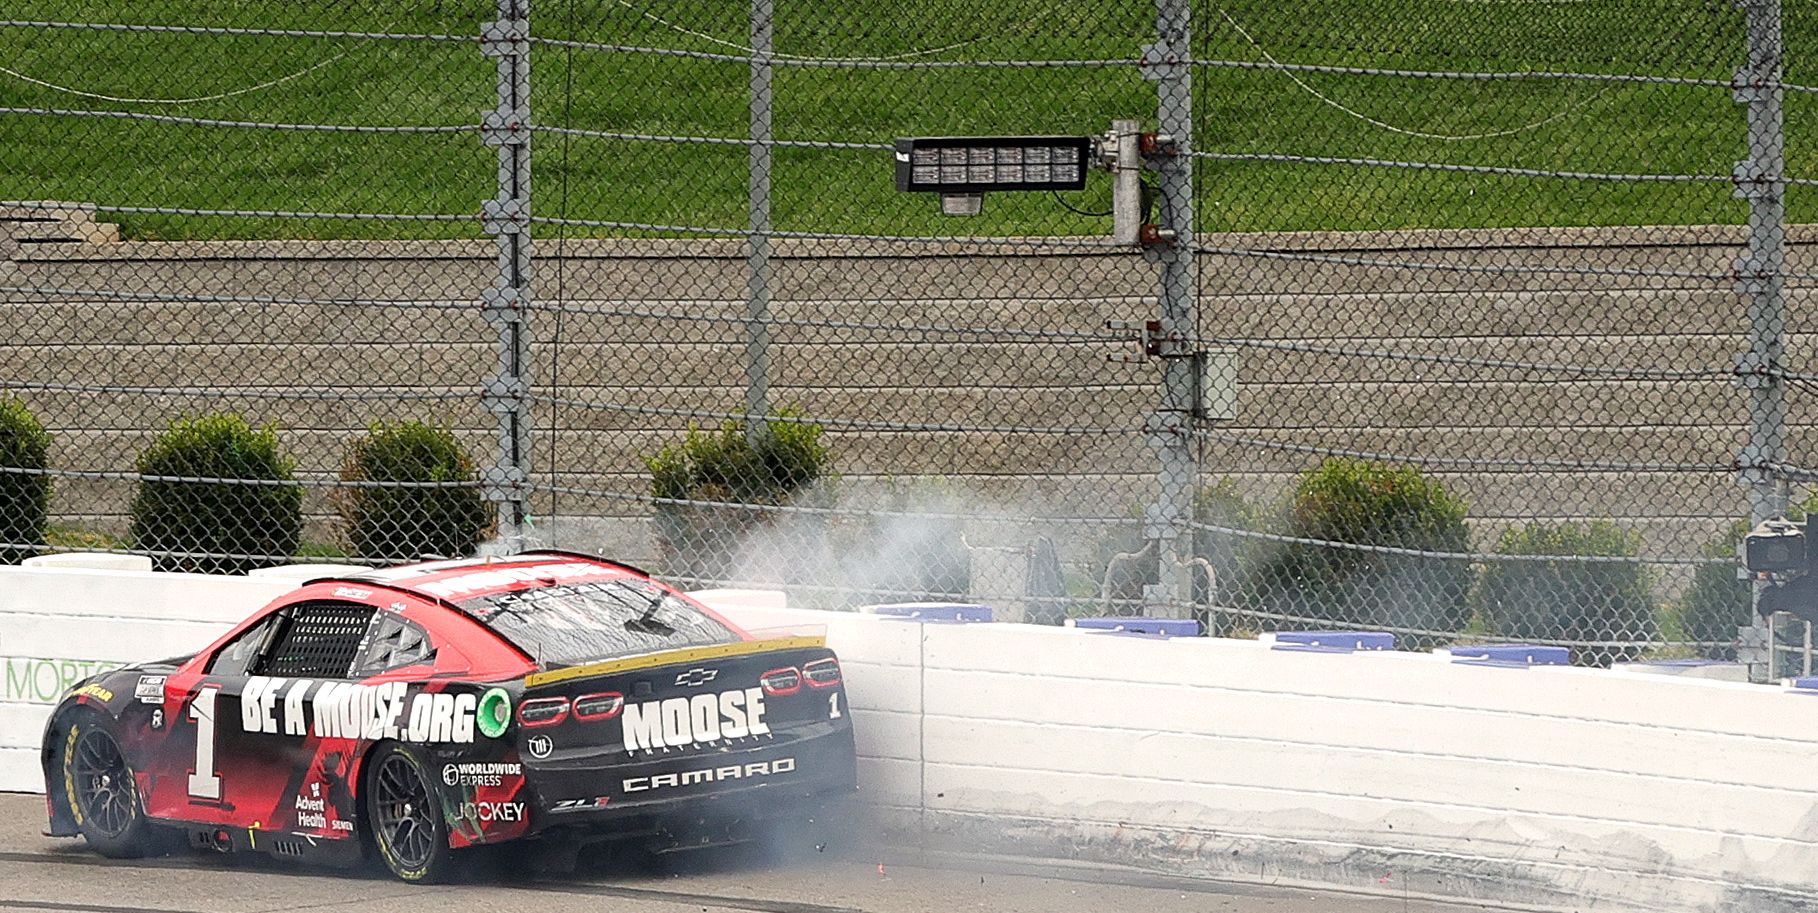 Ross Chastain's NASCAR Wall Ride Should Be Immortalized, But Not Repeated